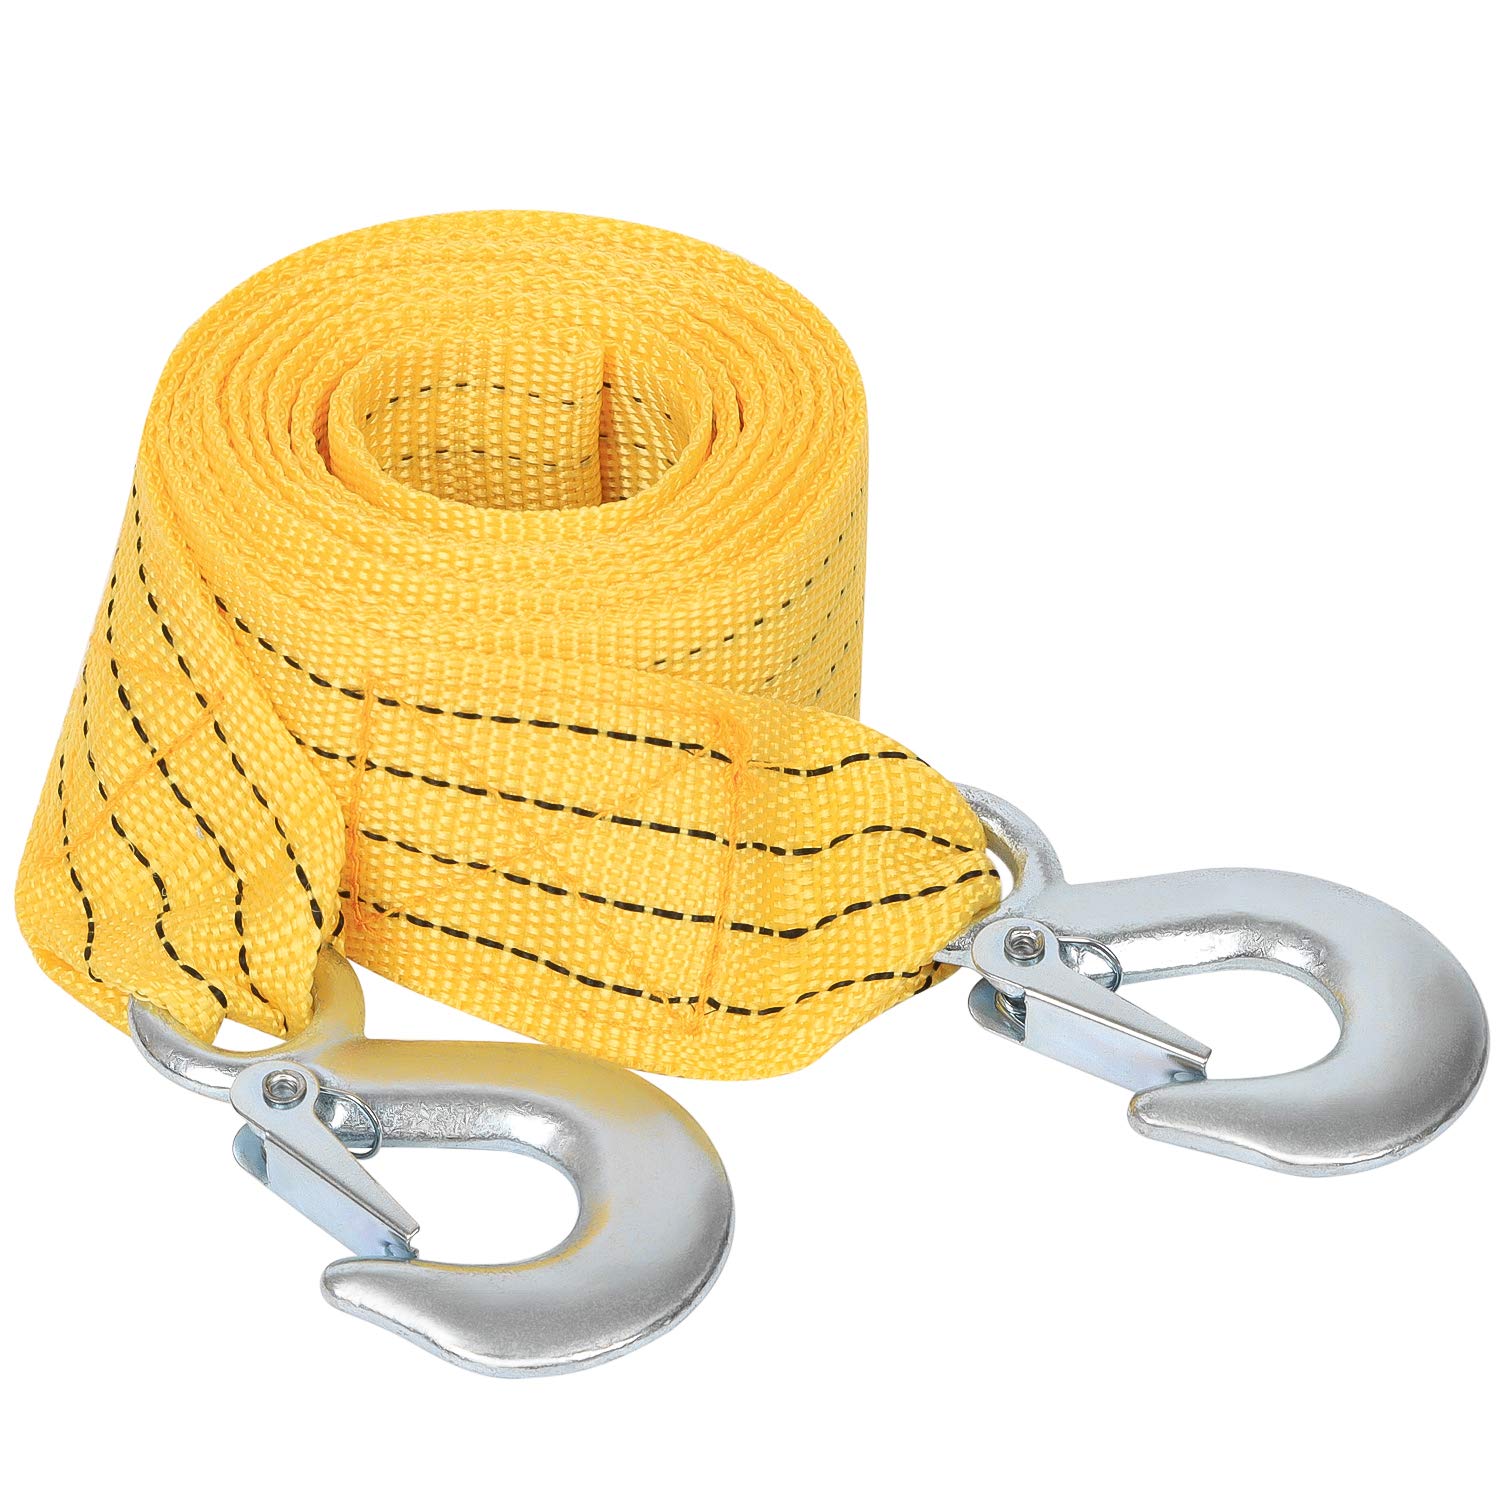 Premium Crane Towing Strap, Heavy Duty Tow Strap with Safety Hooks, 13.2 feet x 2inch Tow Rope Yellow Shackle for Vehicle Recovery, Hauling, Stump Removal & Much More